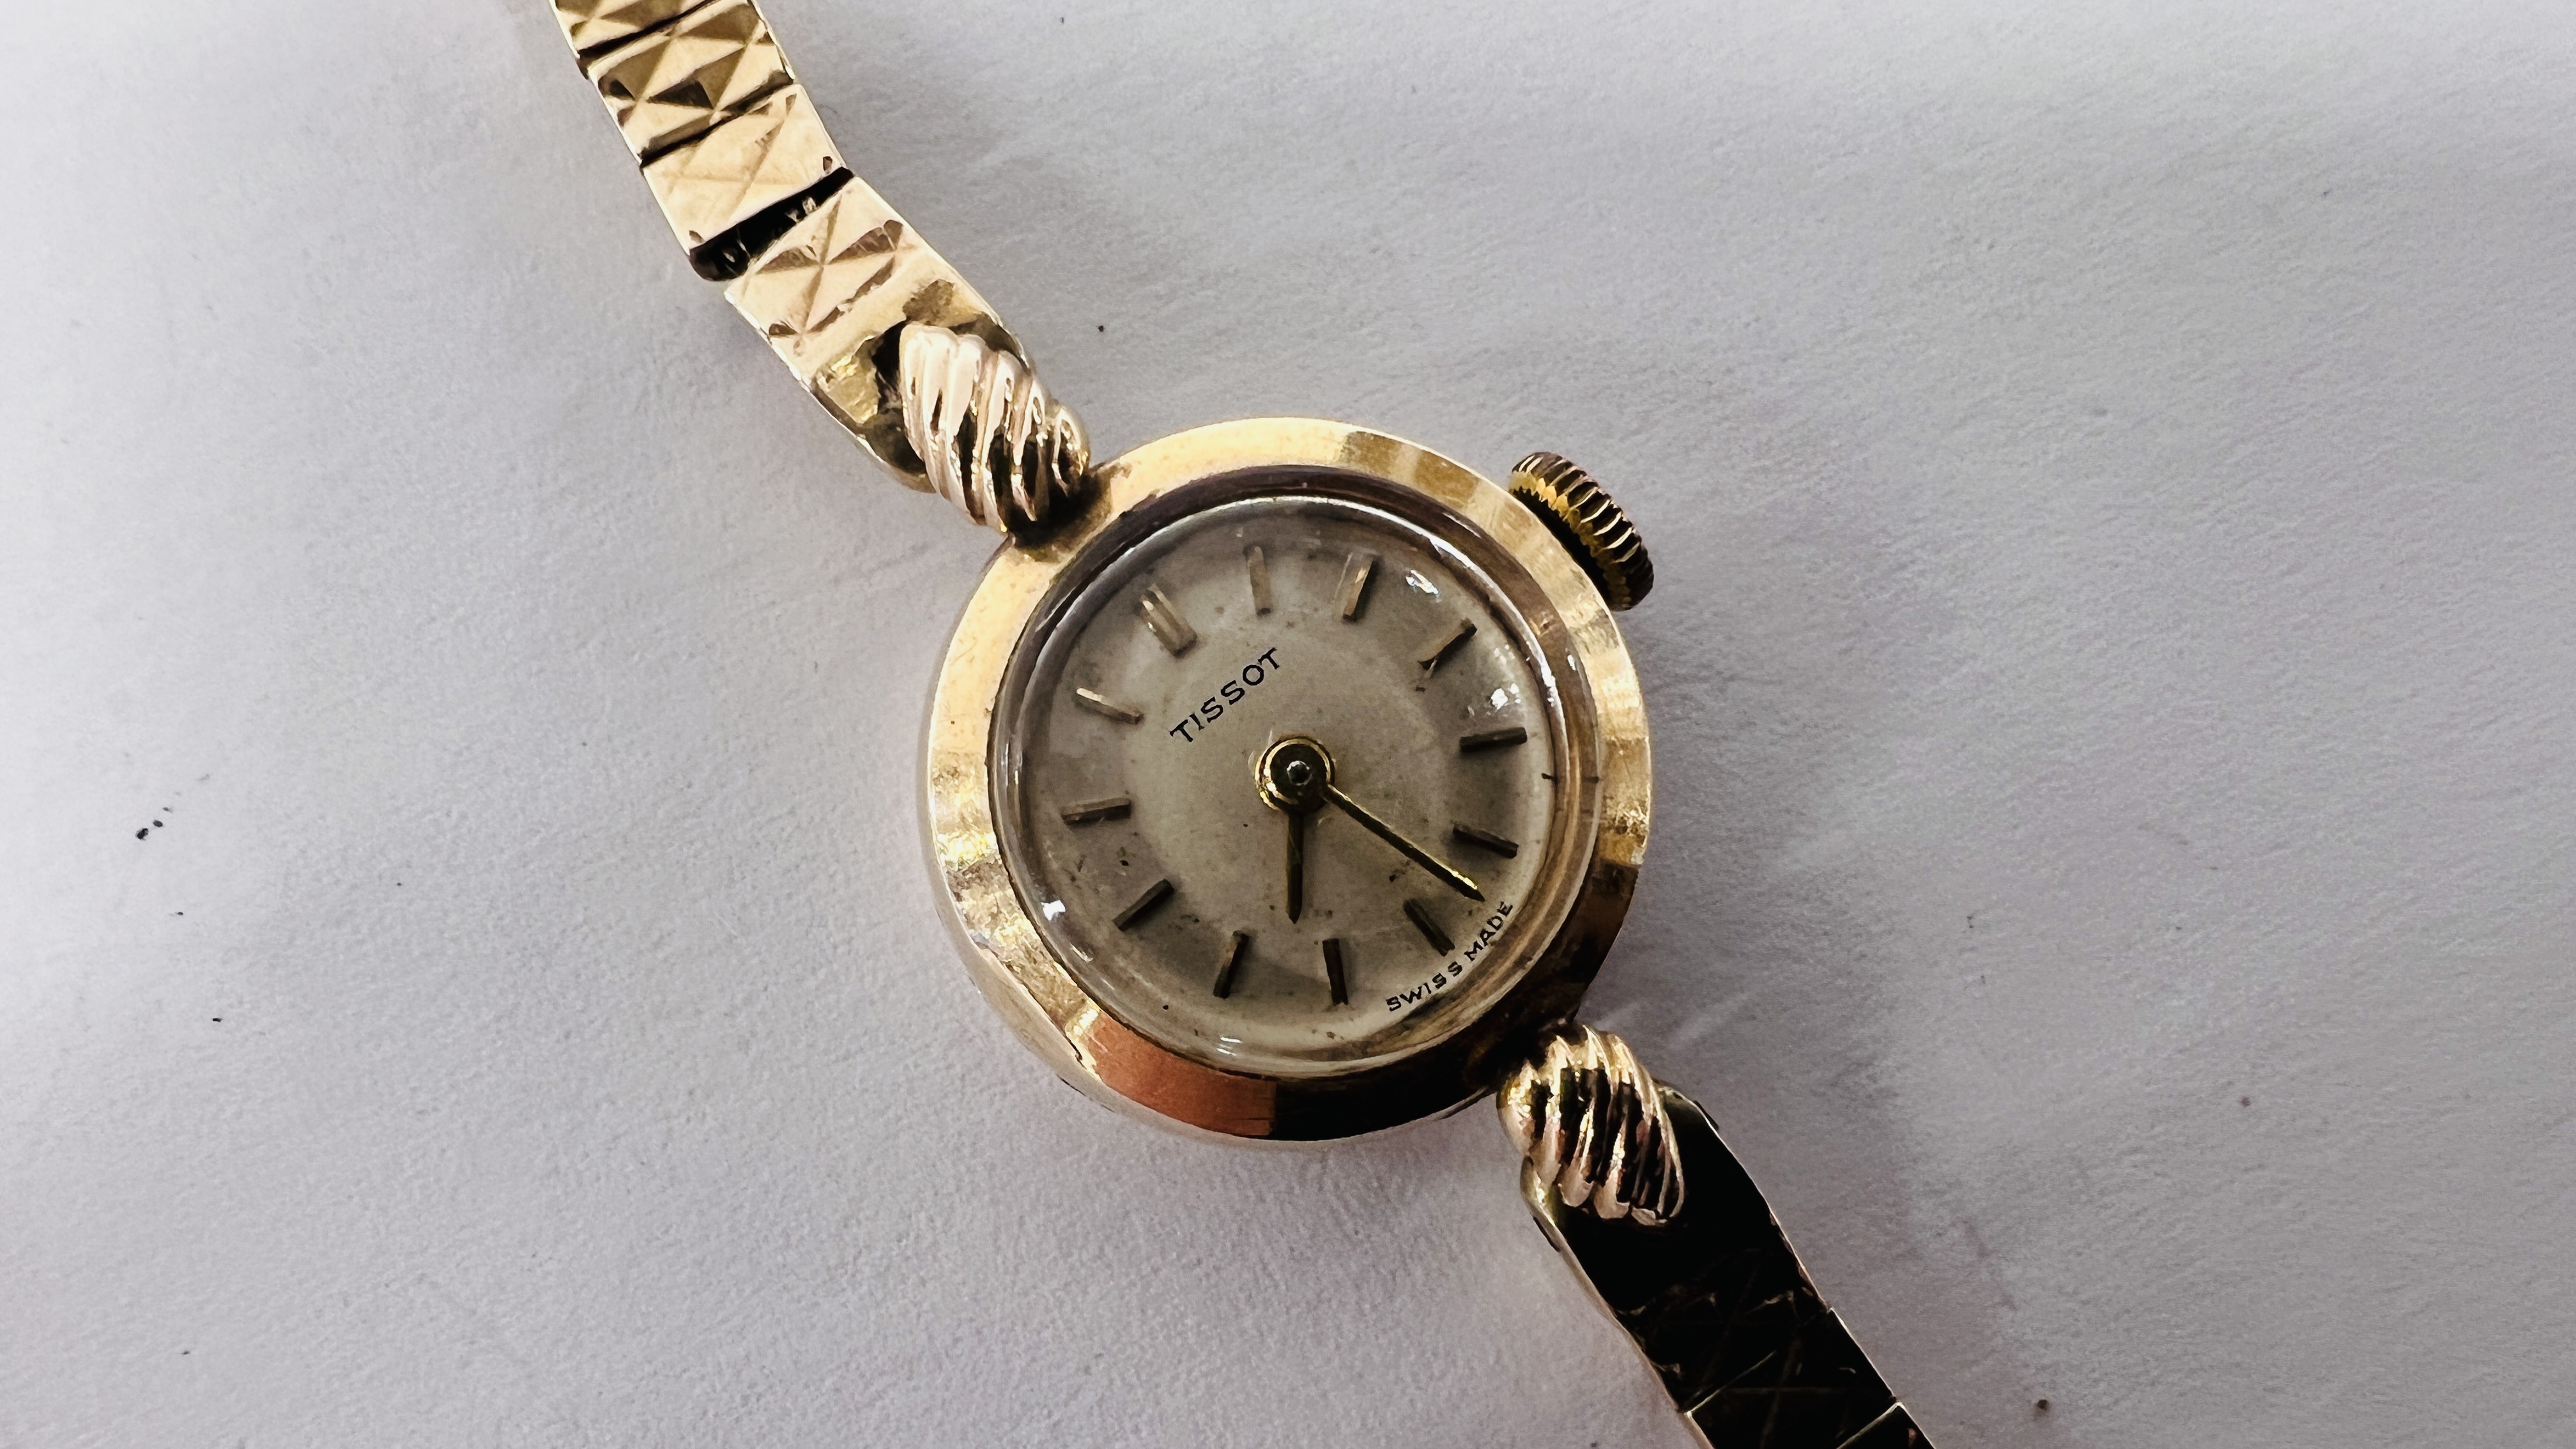 A LADY'S 9CT GOLD TISSOT WRISTWATCH WITH BATON NUMERALS, ON A 9CT GOLD BRACELET. - Image 8 of 13